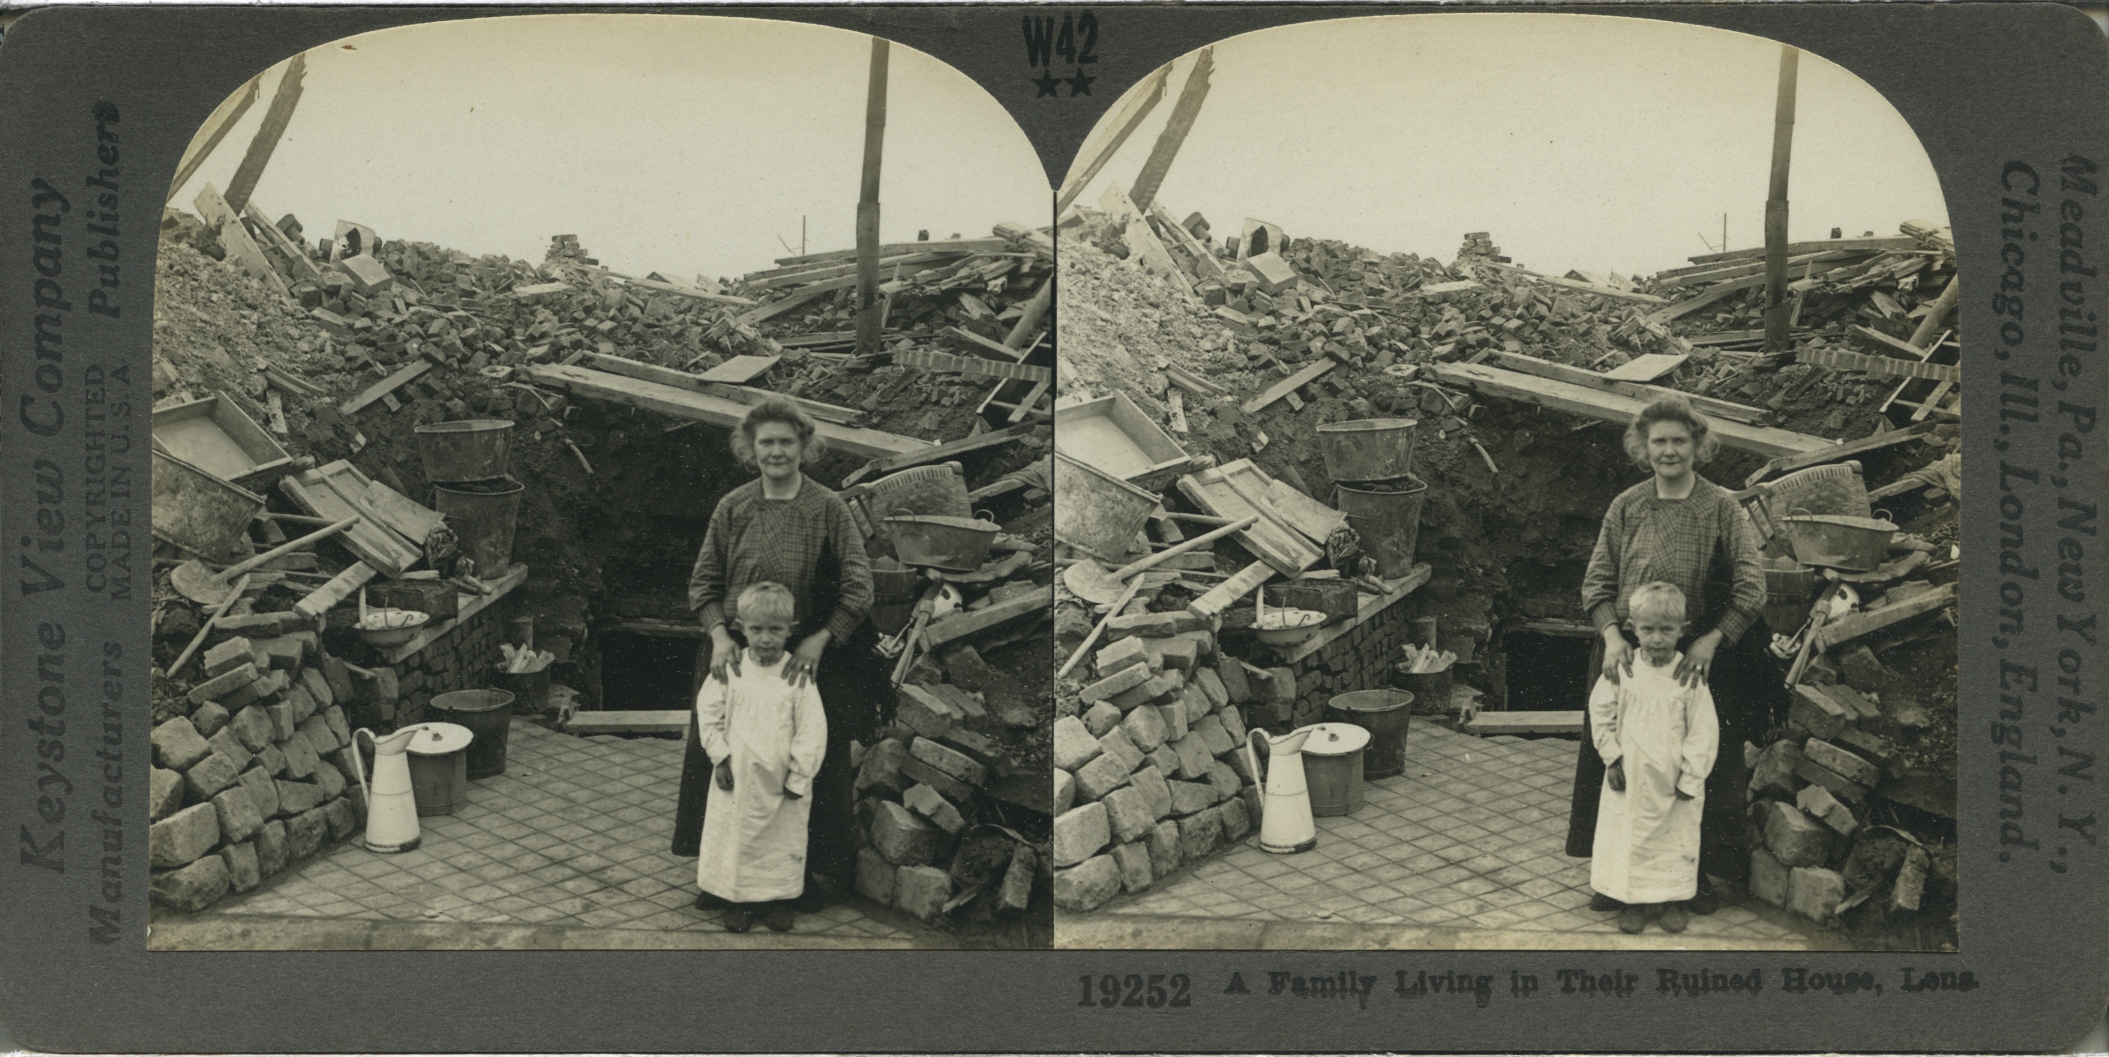 A Family Living in Their Ruined House, Lens